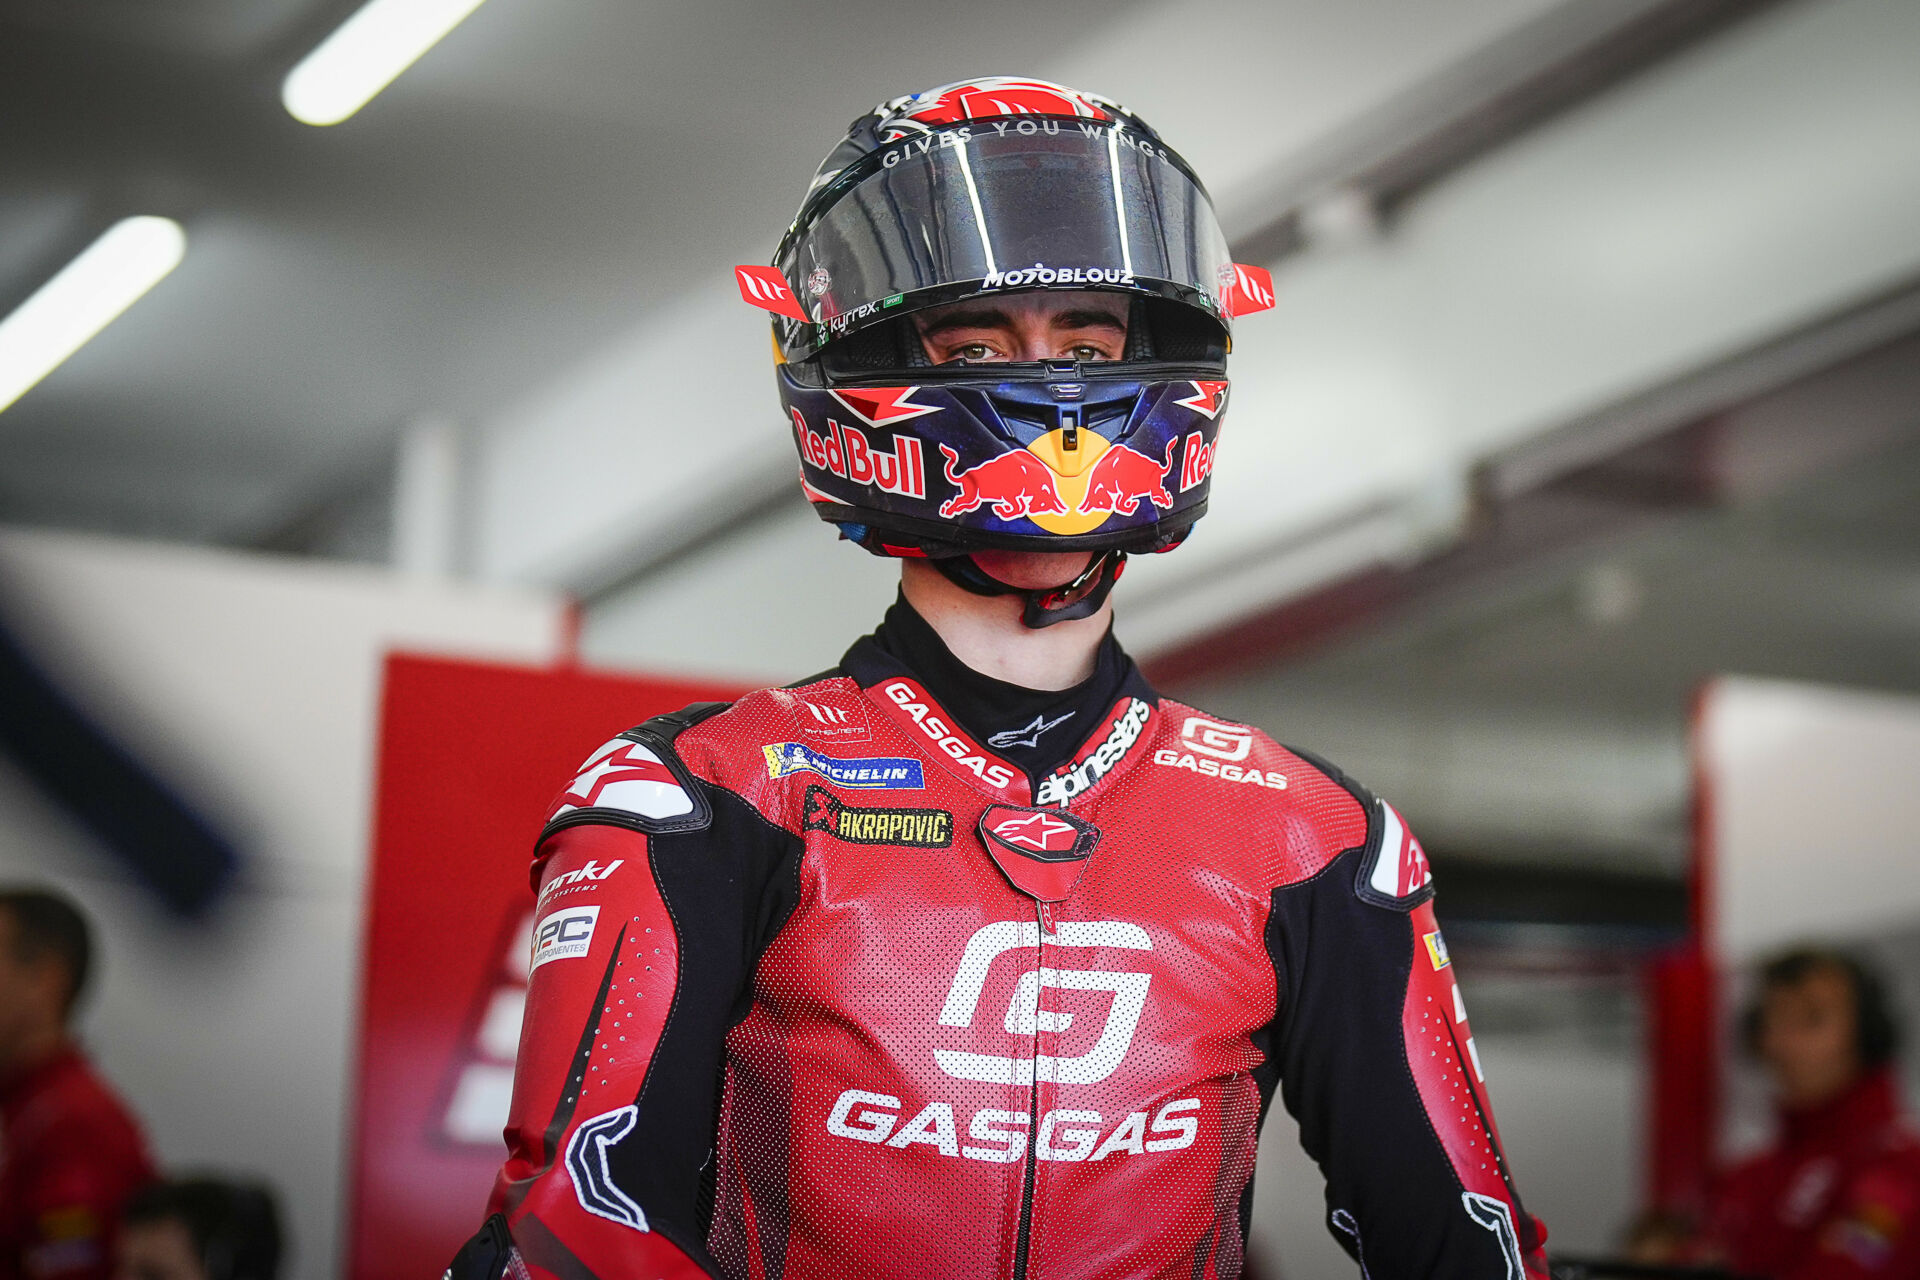 Moto2 World Champion Pedro Acosta, who is stepping up to the MotoGP World Championship with Pedro Acosta lands at GASGAS Factory Racing Tech3. Photo courtesy Dorna.